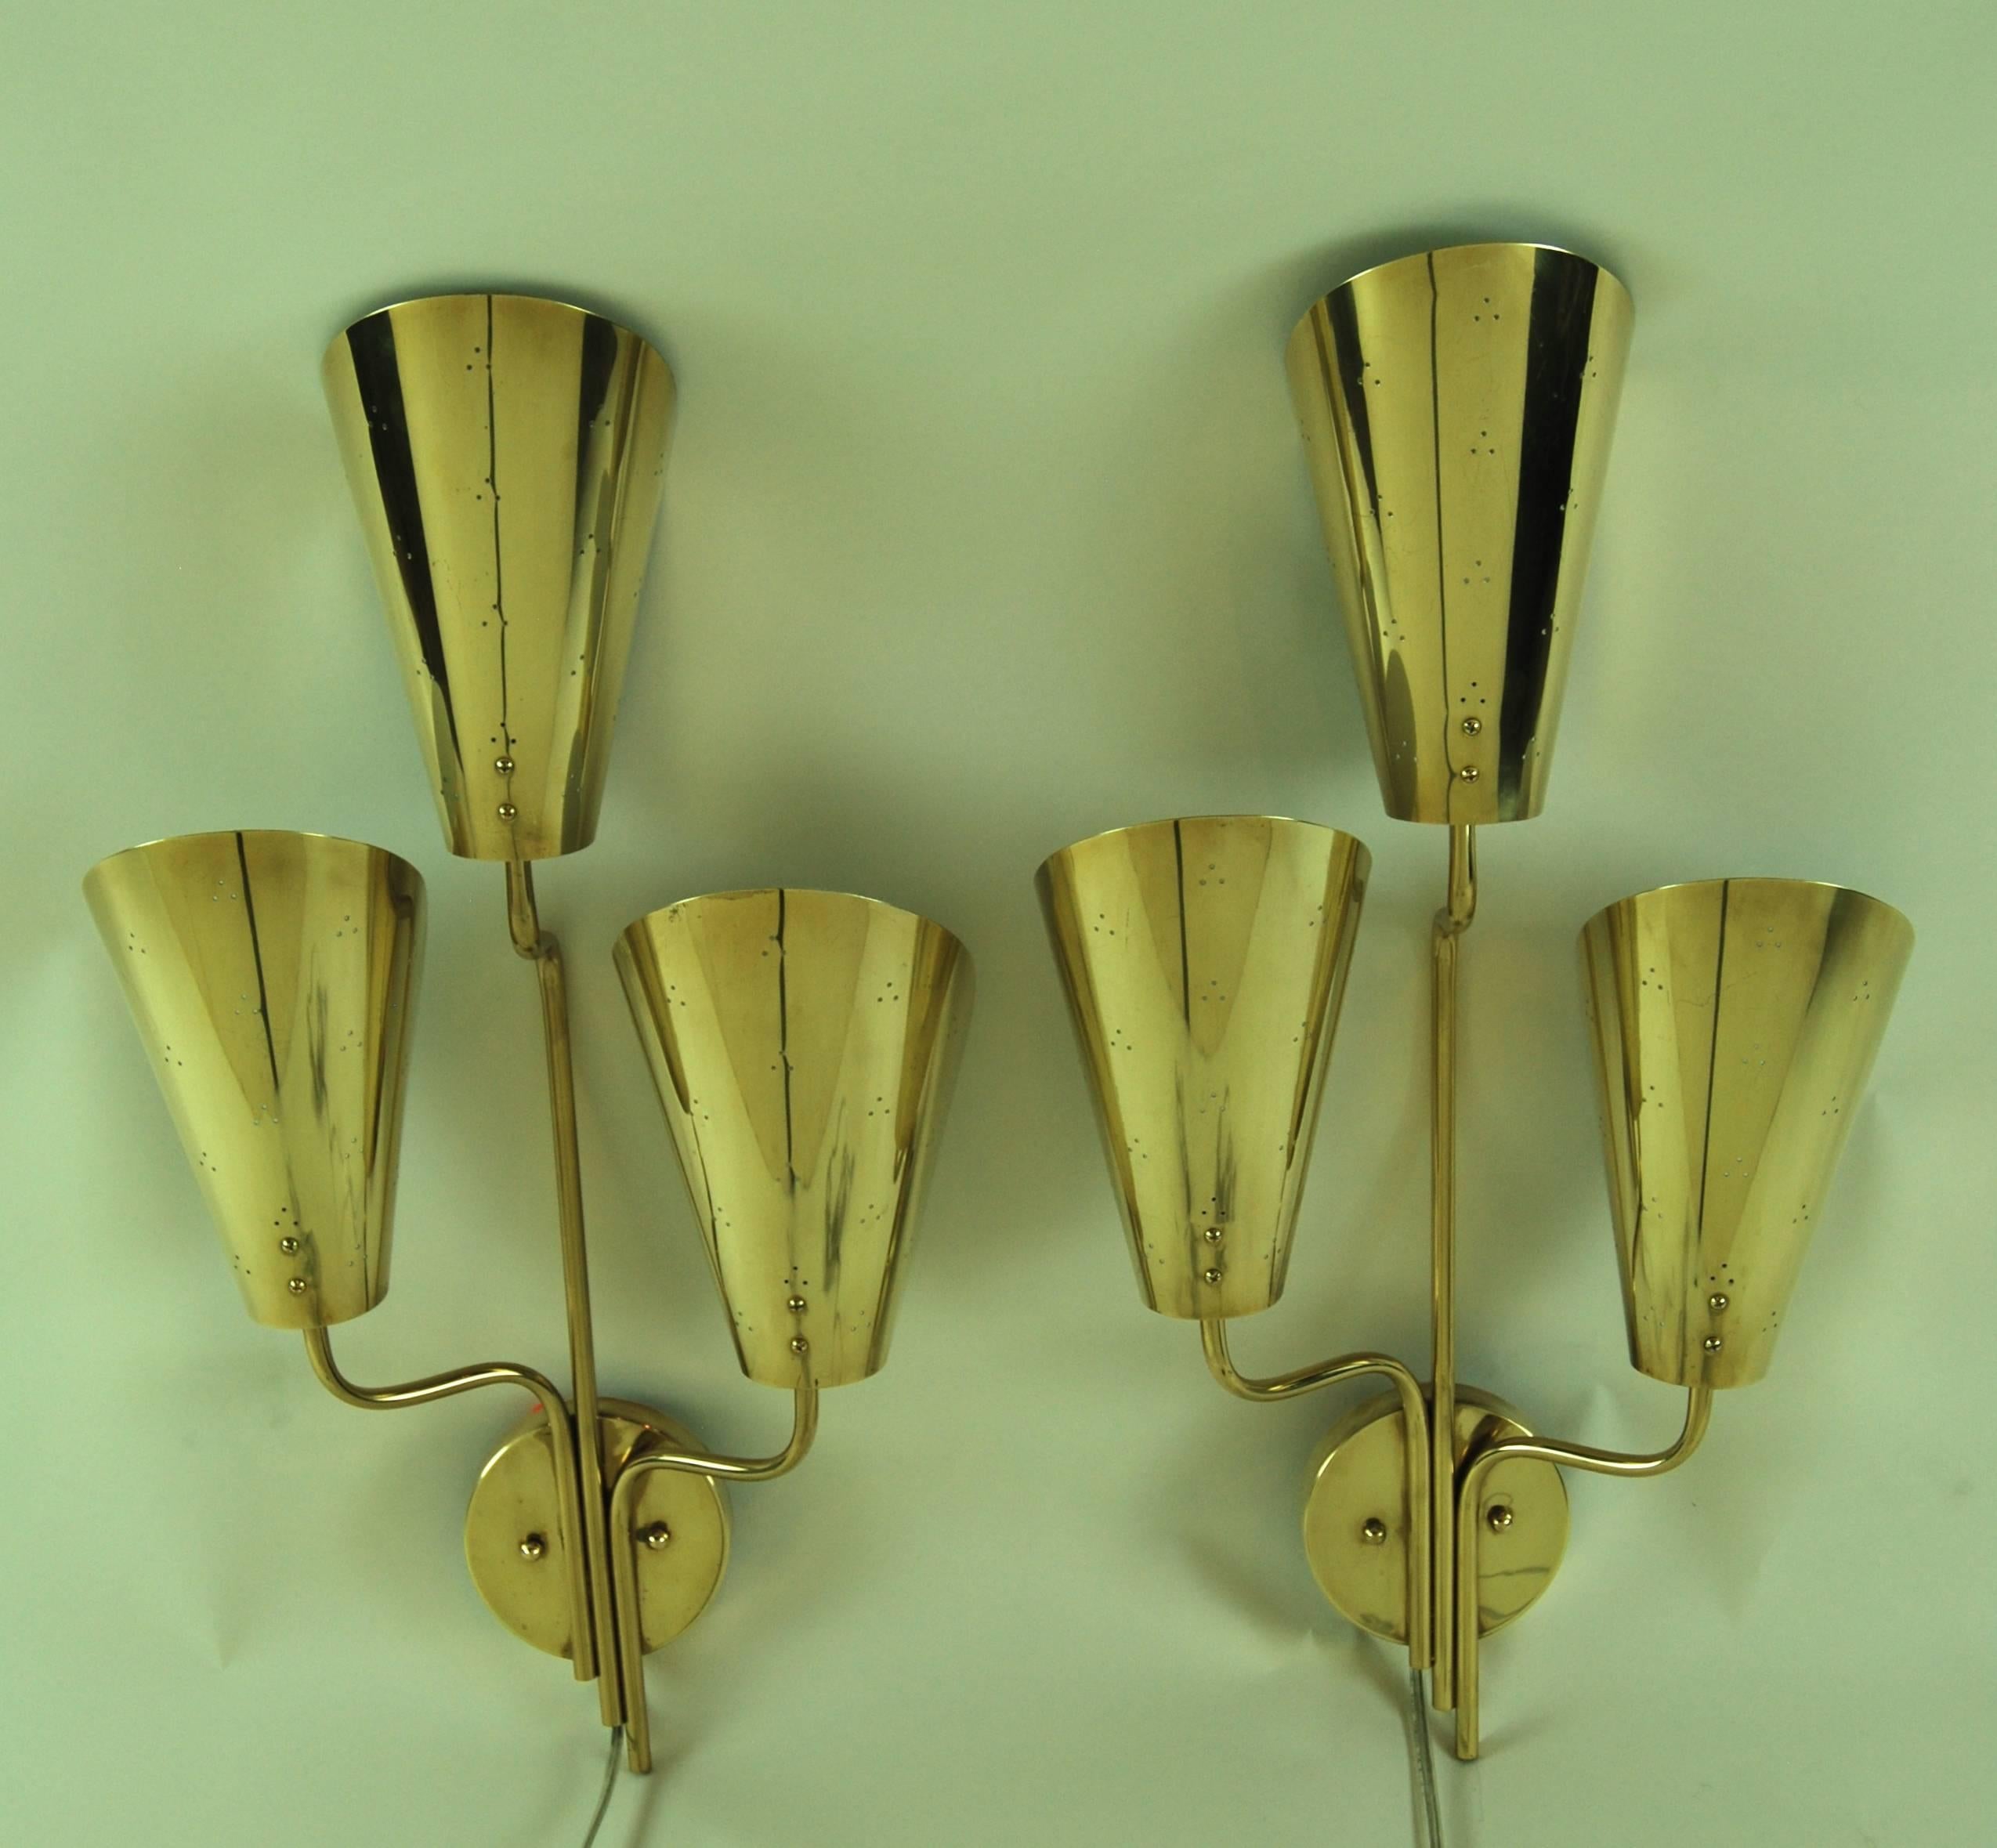 Pair of brass sconces by Paavo Tynell for Lightolier, 1950s.
Newly rewired and polished to perfection. Marked with Lightolier labels.
Great scale and glamour.